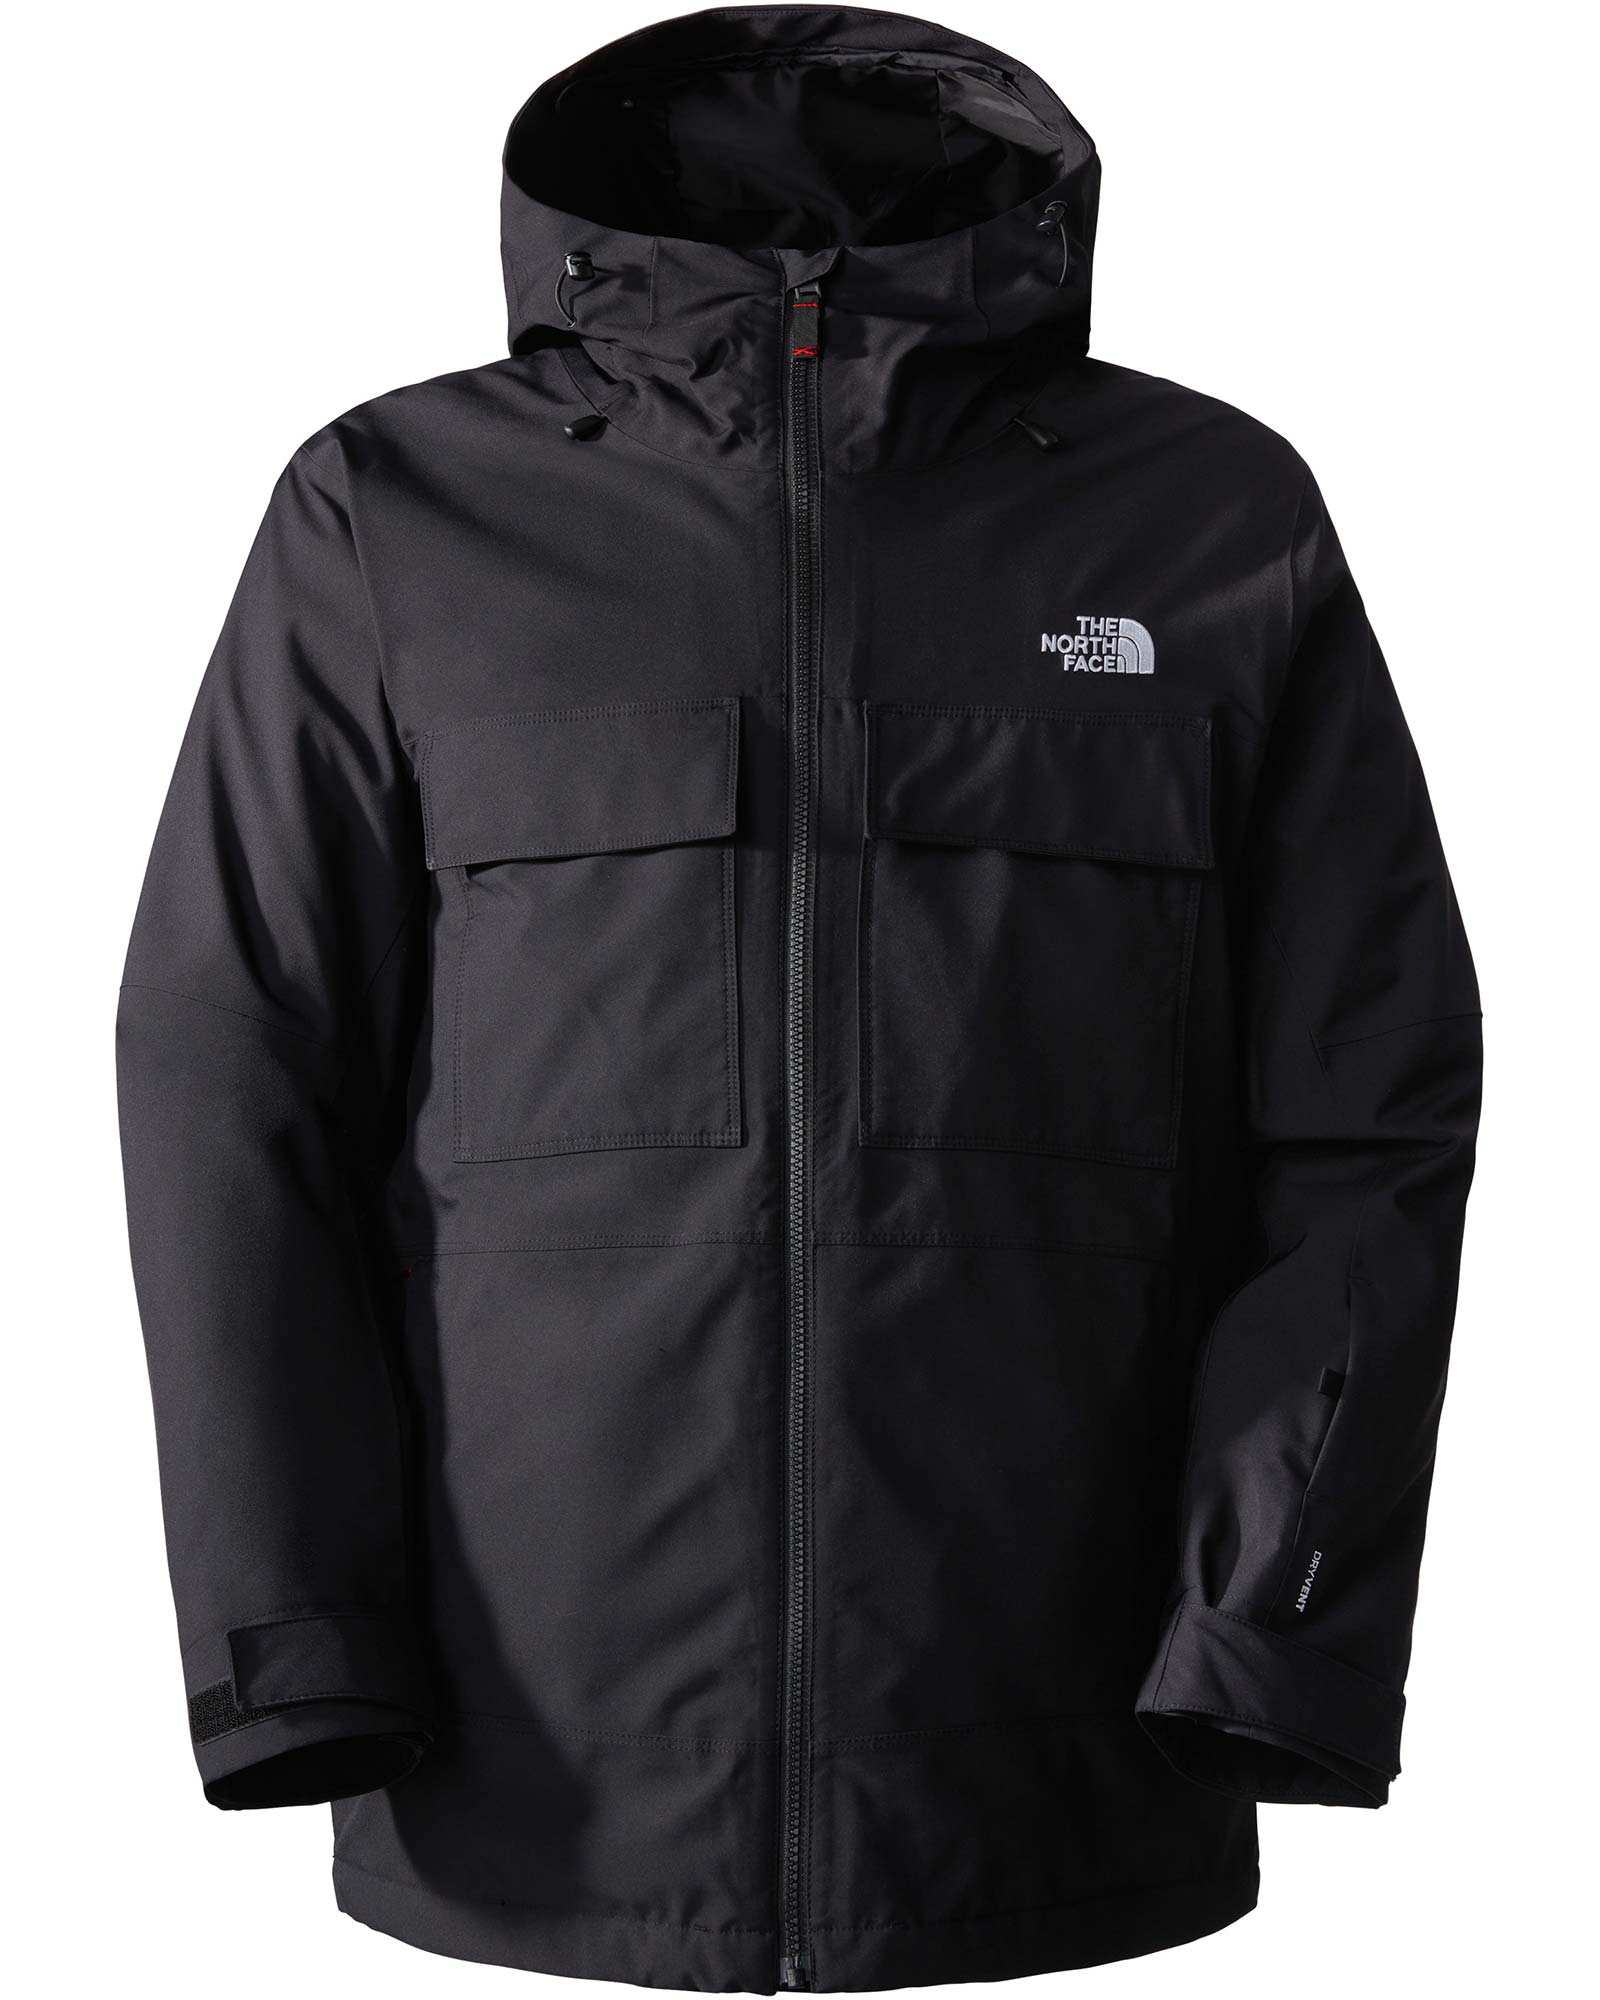 The North Face Men’s Fourbarrel Triclimate Jacket - TNF Black S